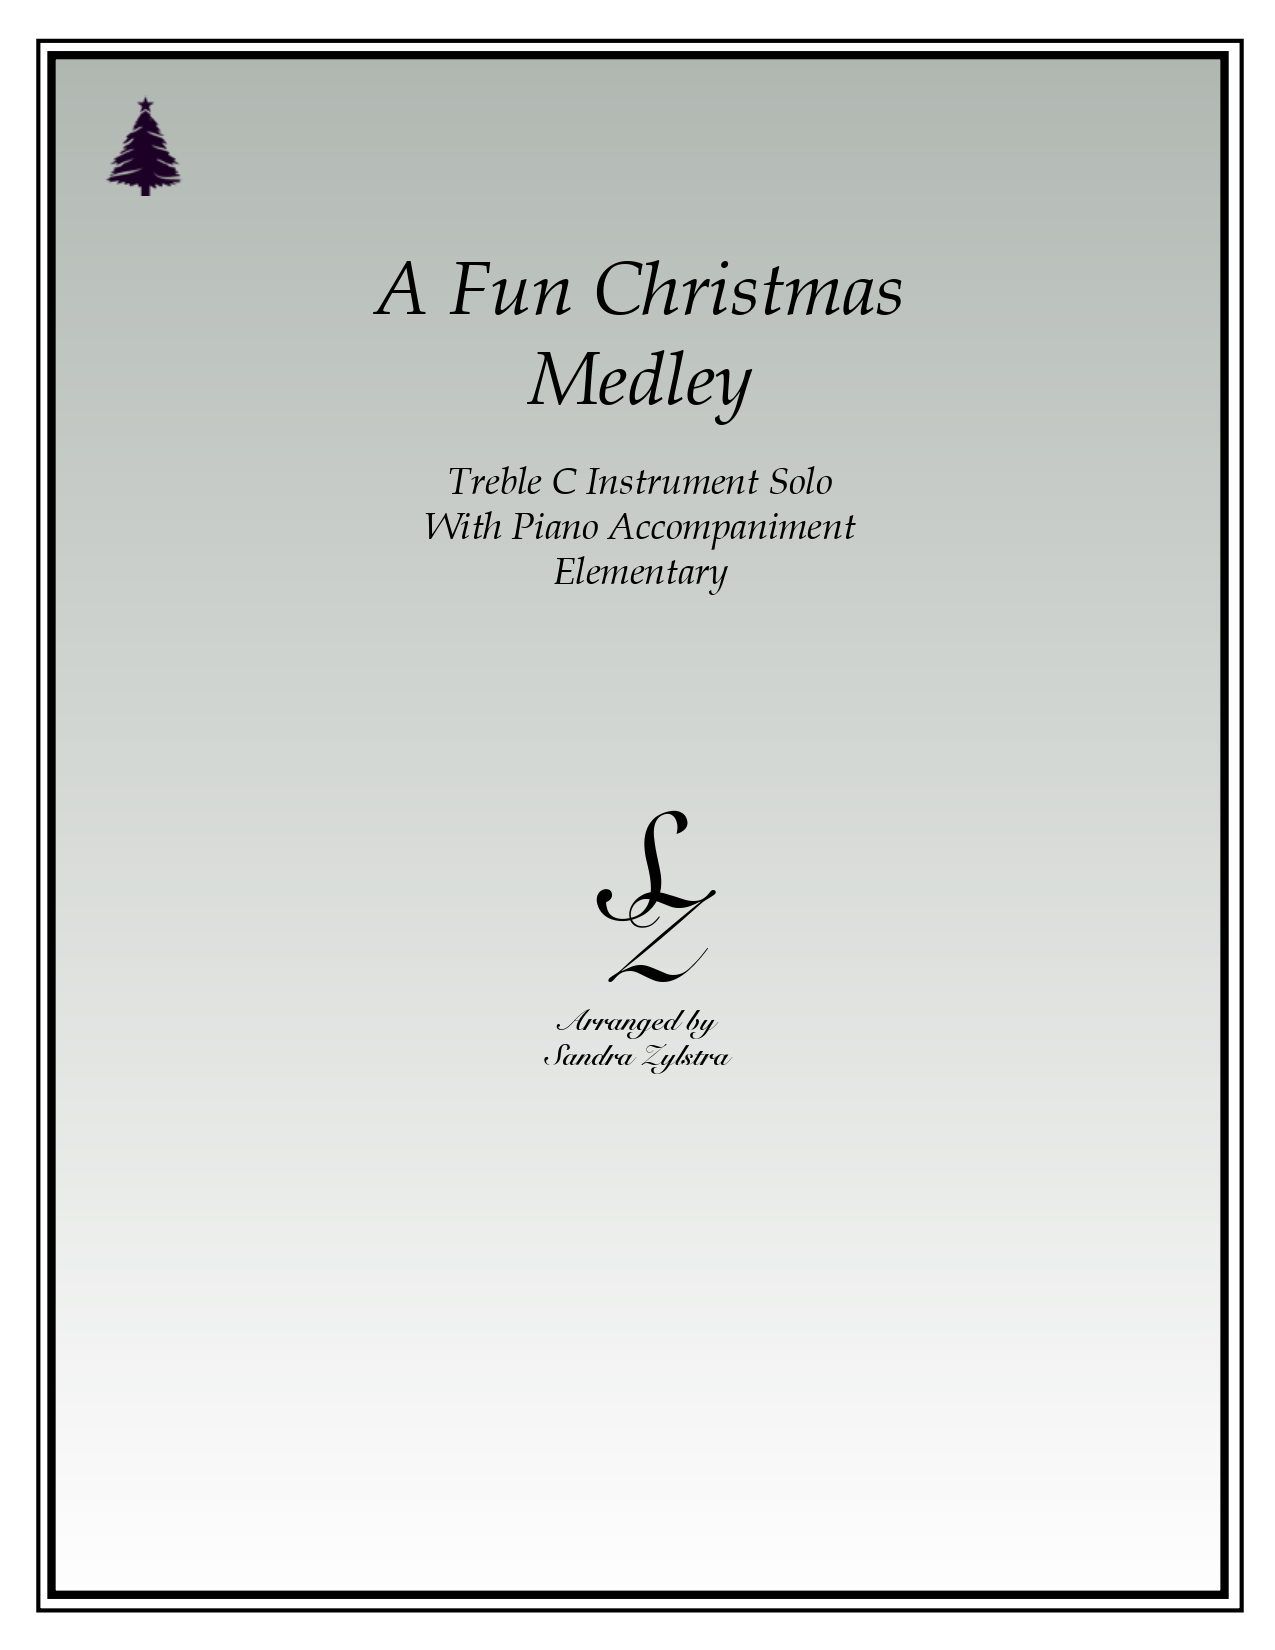 A Fun Christmas Medley treble C instrument solo parts cover page 00011